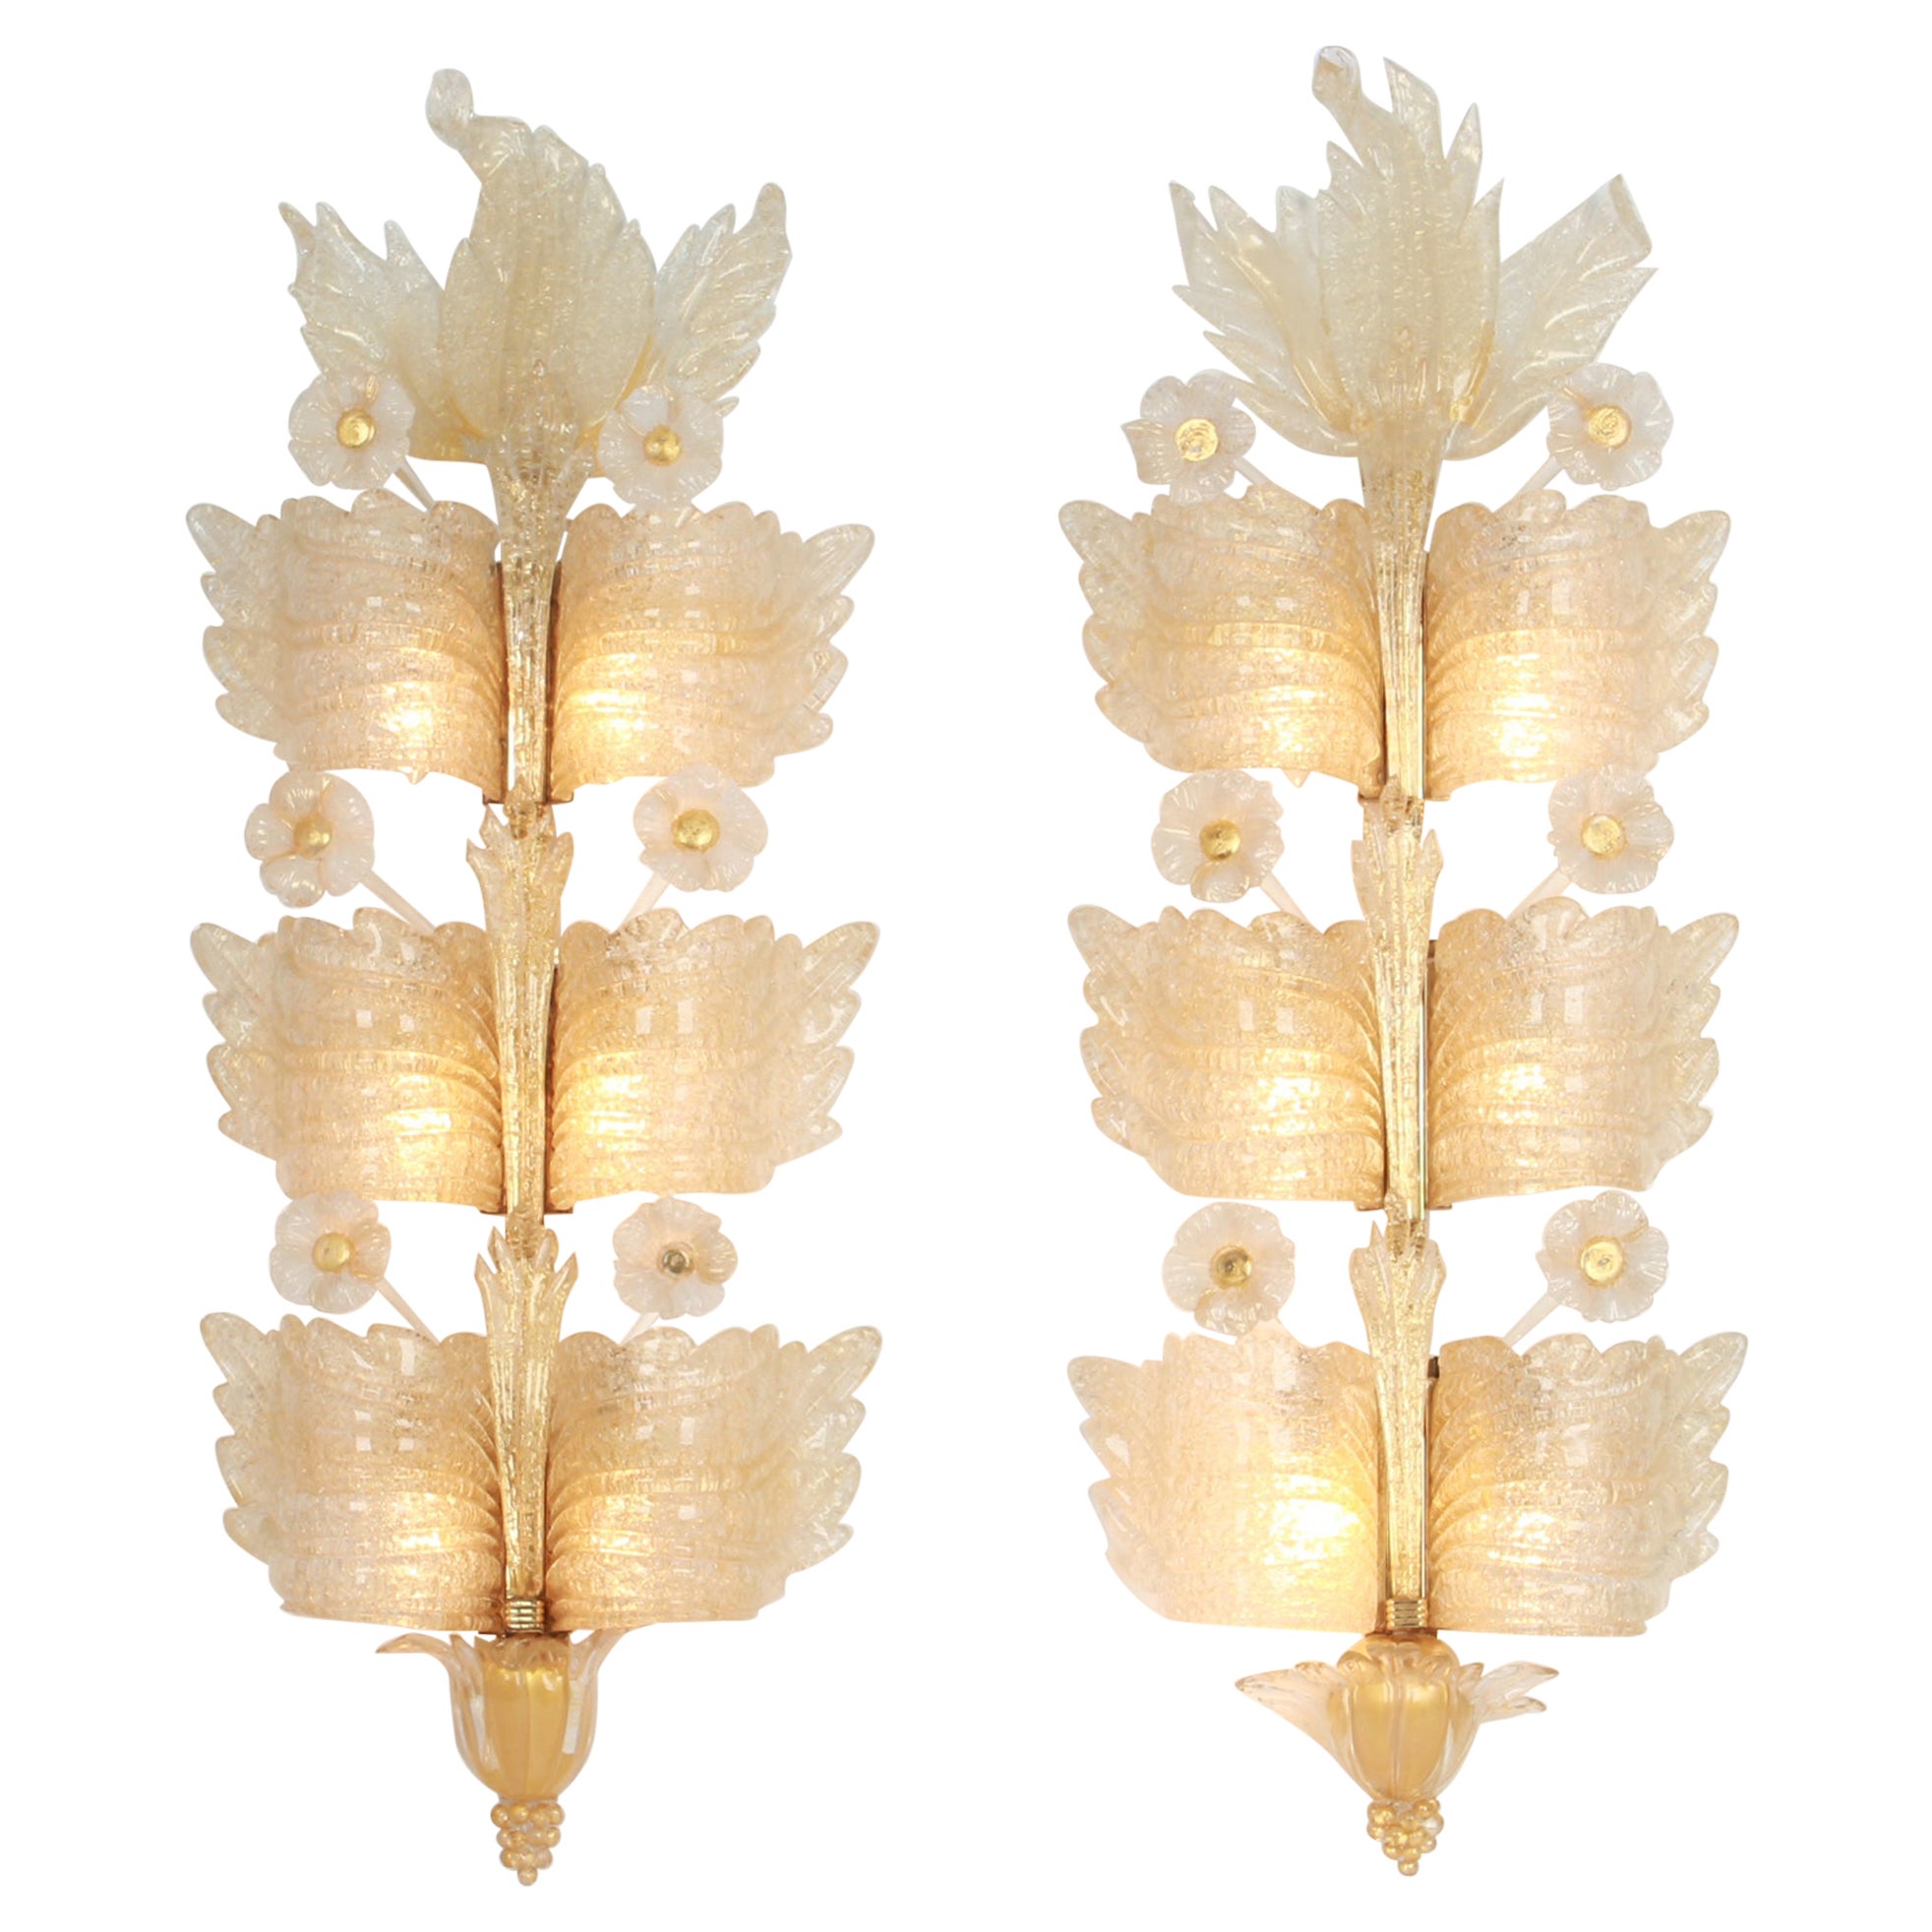 Pair of Extra Large Murano Glass Wall Sconces by Barovier & Toso, Italy, 1970s